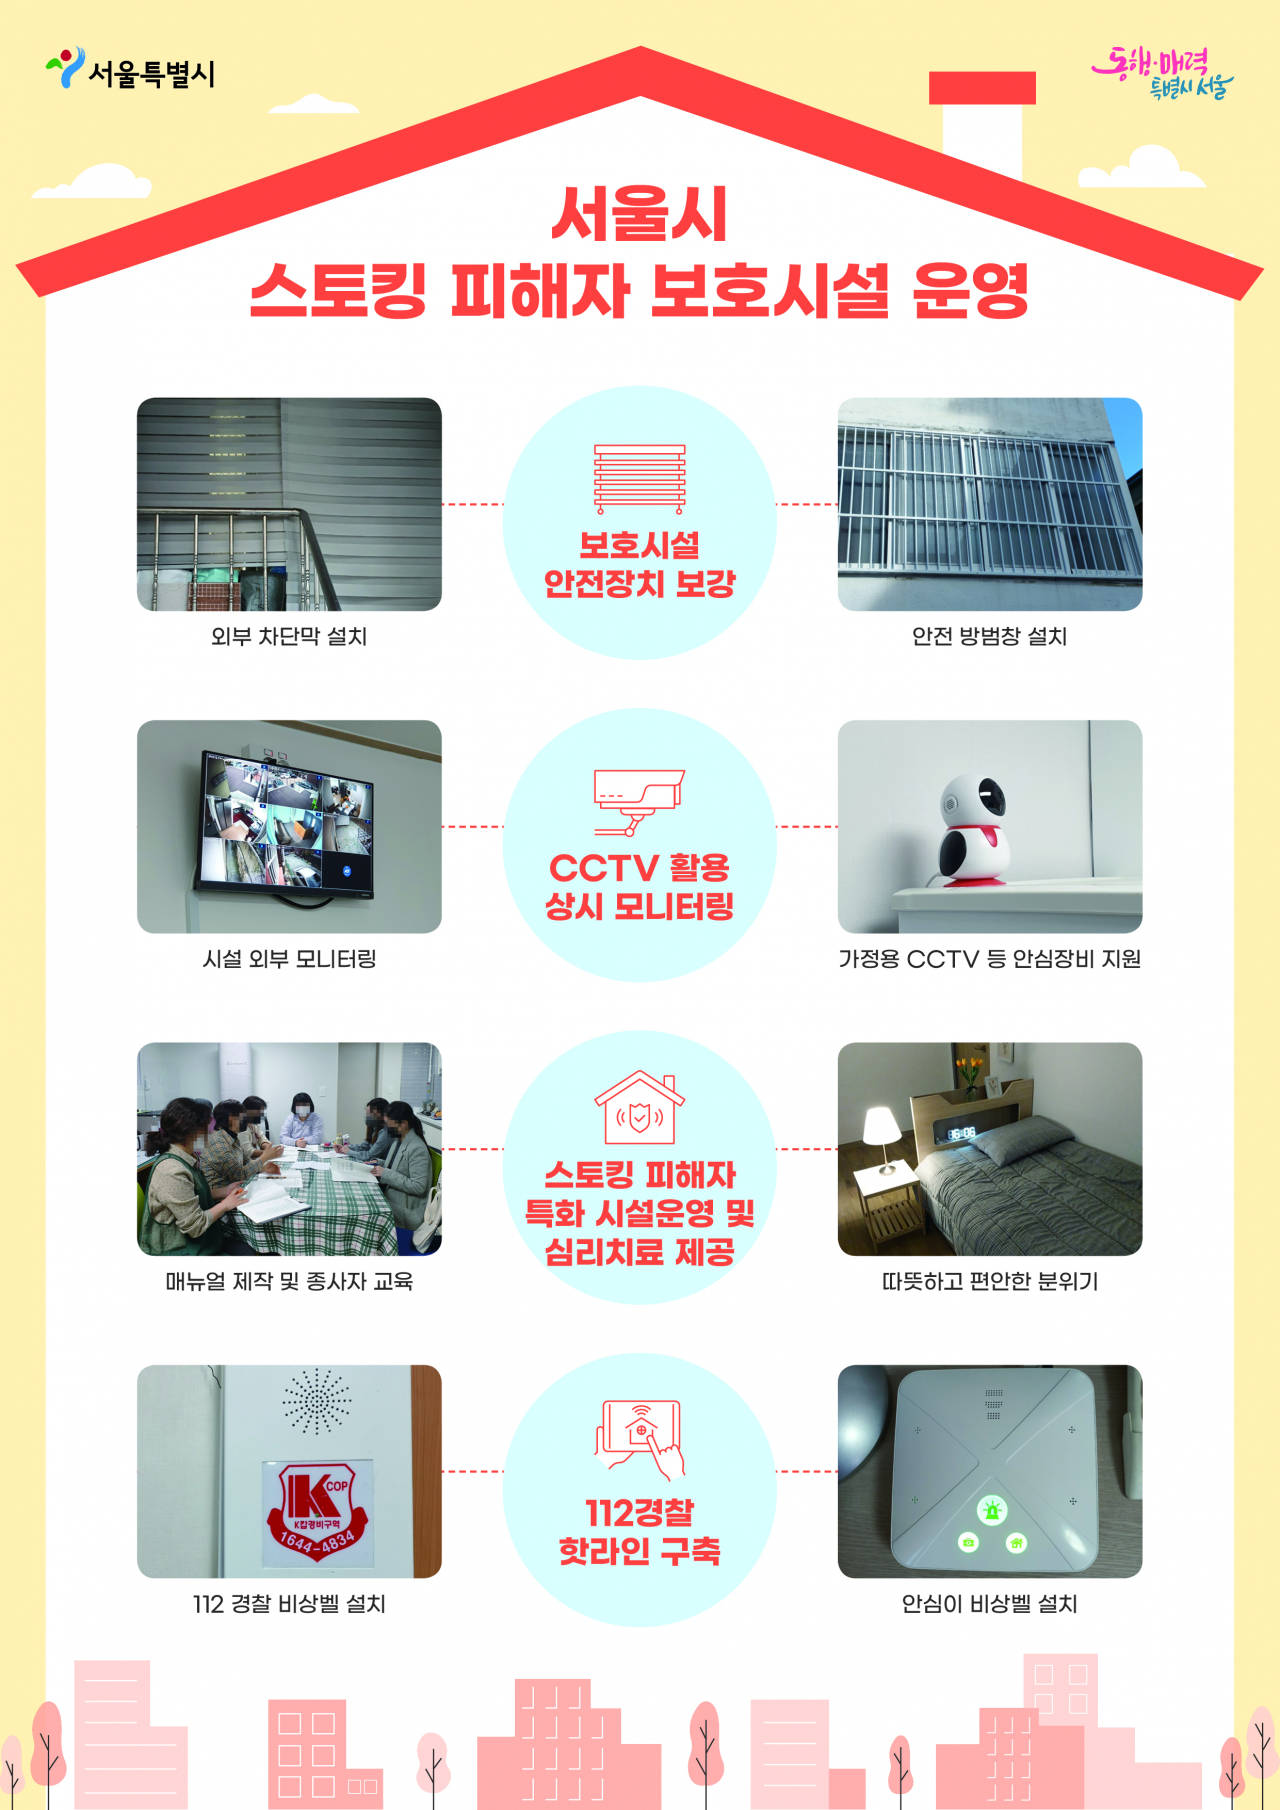 This image shows security measures taken to reinforce safety in shelters for stalking victims, projected to open this Thursday, in Seoul. (Seoul Metropolitan Government)